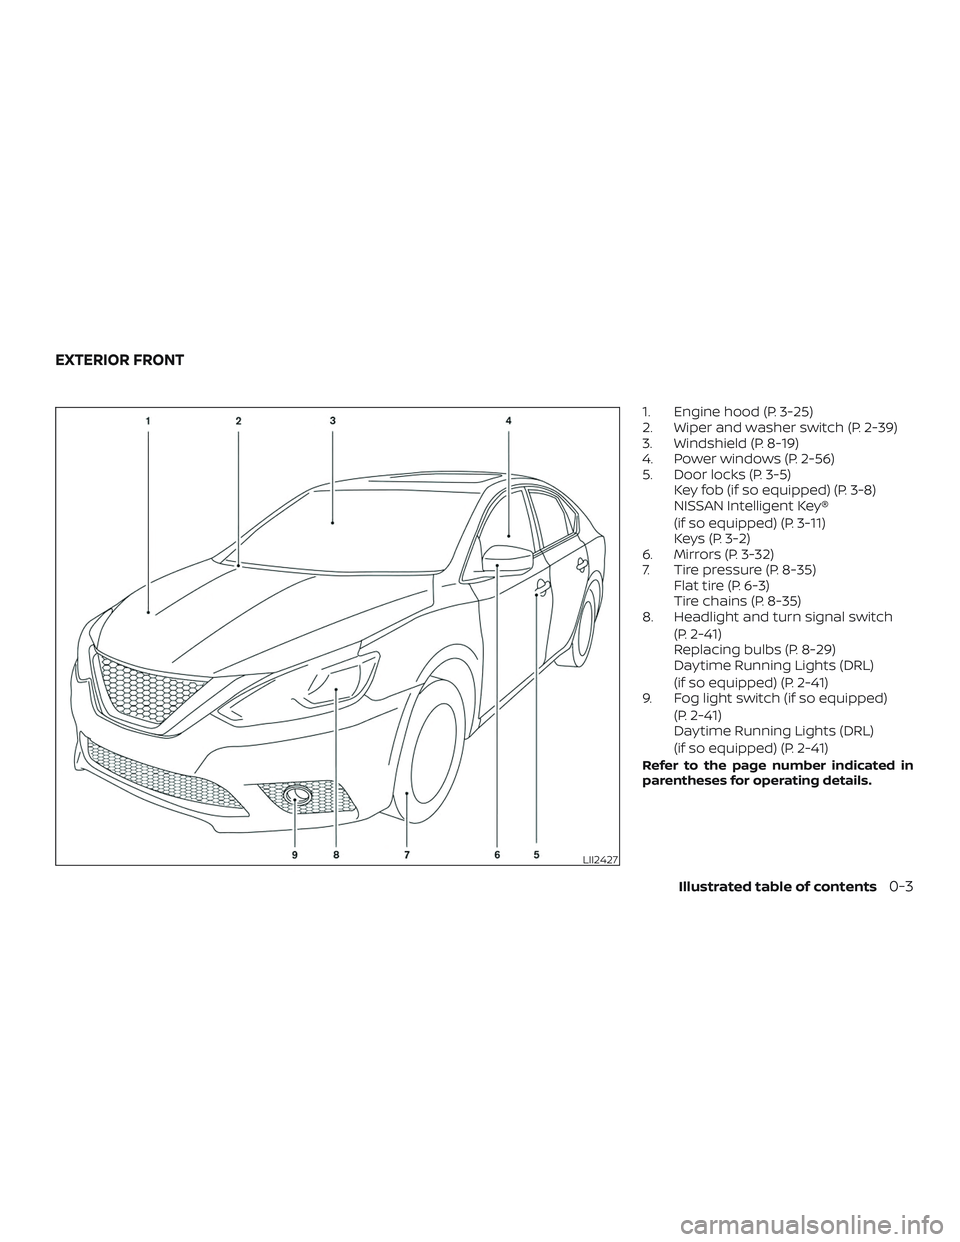 NISSAN SENTRA 2018  Owner´s Manual 1. Engine hood (P. 3-25)
2. Wiper and washer switch (P. 2-39)
3. Windshield (P. 8-19)
4. Power windows (P. 2-56)
5. Door locks (P. 3-5)Key fob (if so equipped) (P. 3-8)
NISSAN Intelligent Key®
(if so